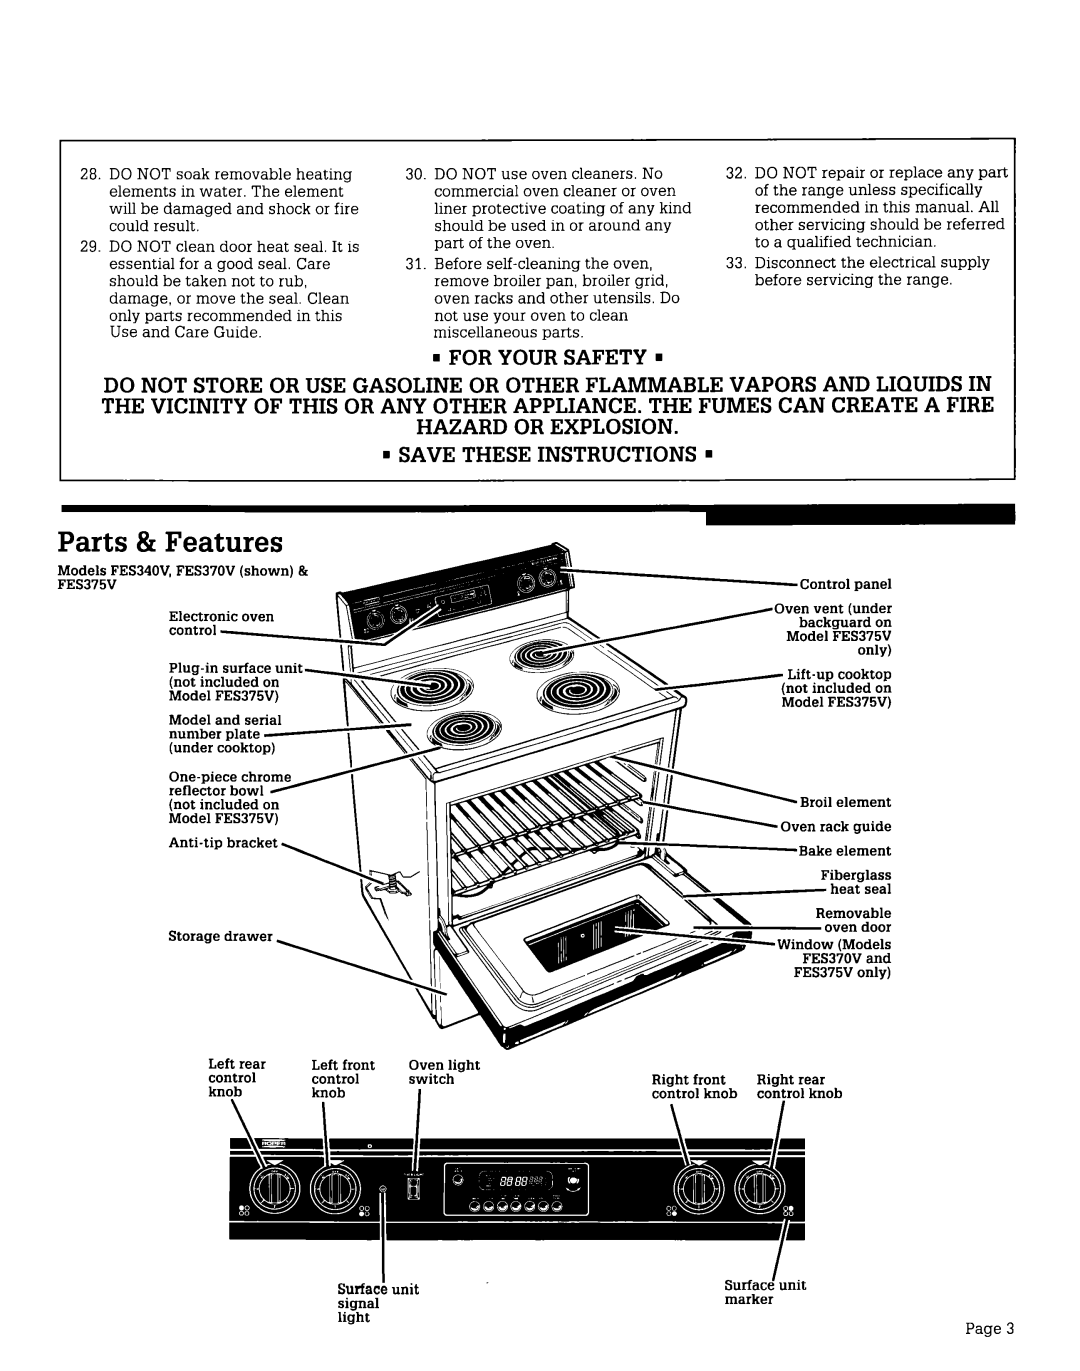 Whirlpool FES375V, FES370V, FES340V manual Parts & Features, For Your Safety, Save These Instructions 